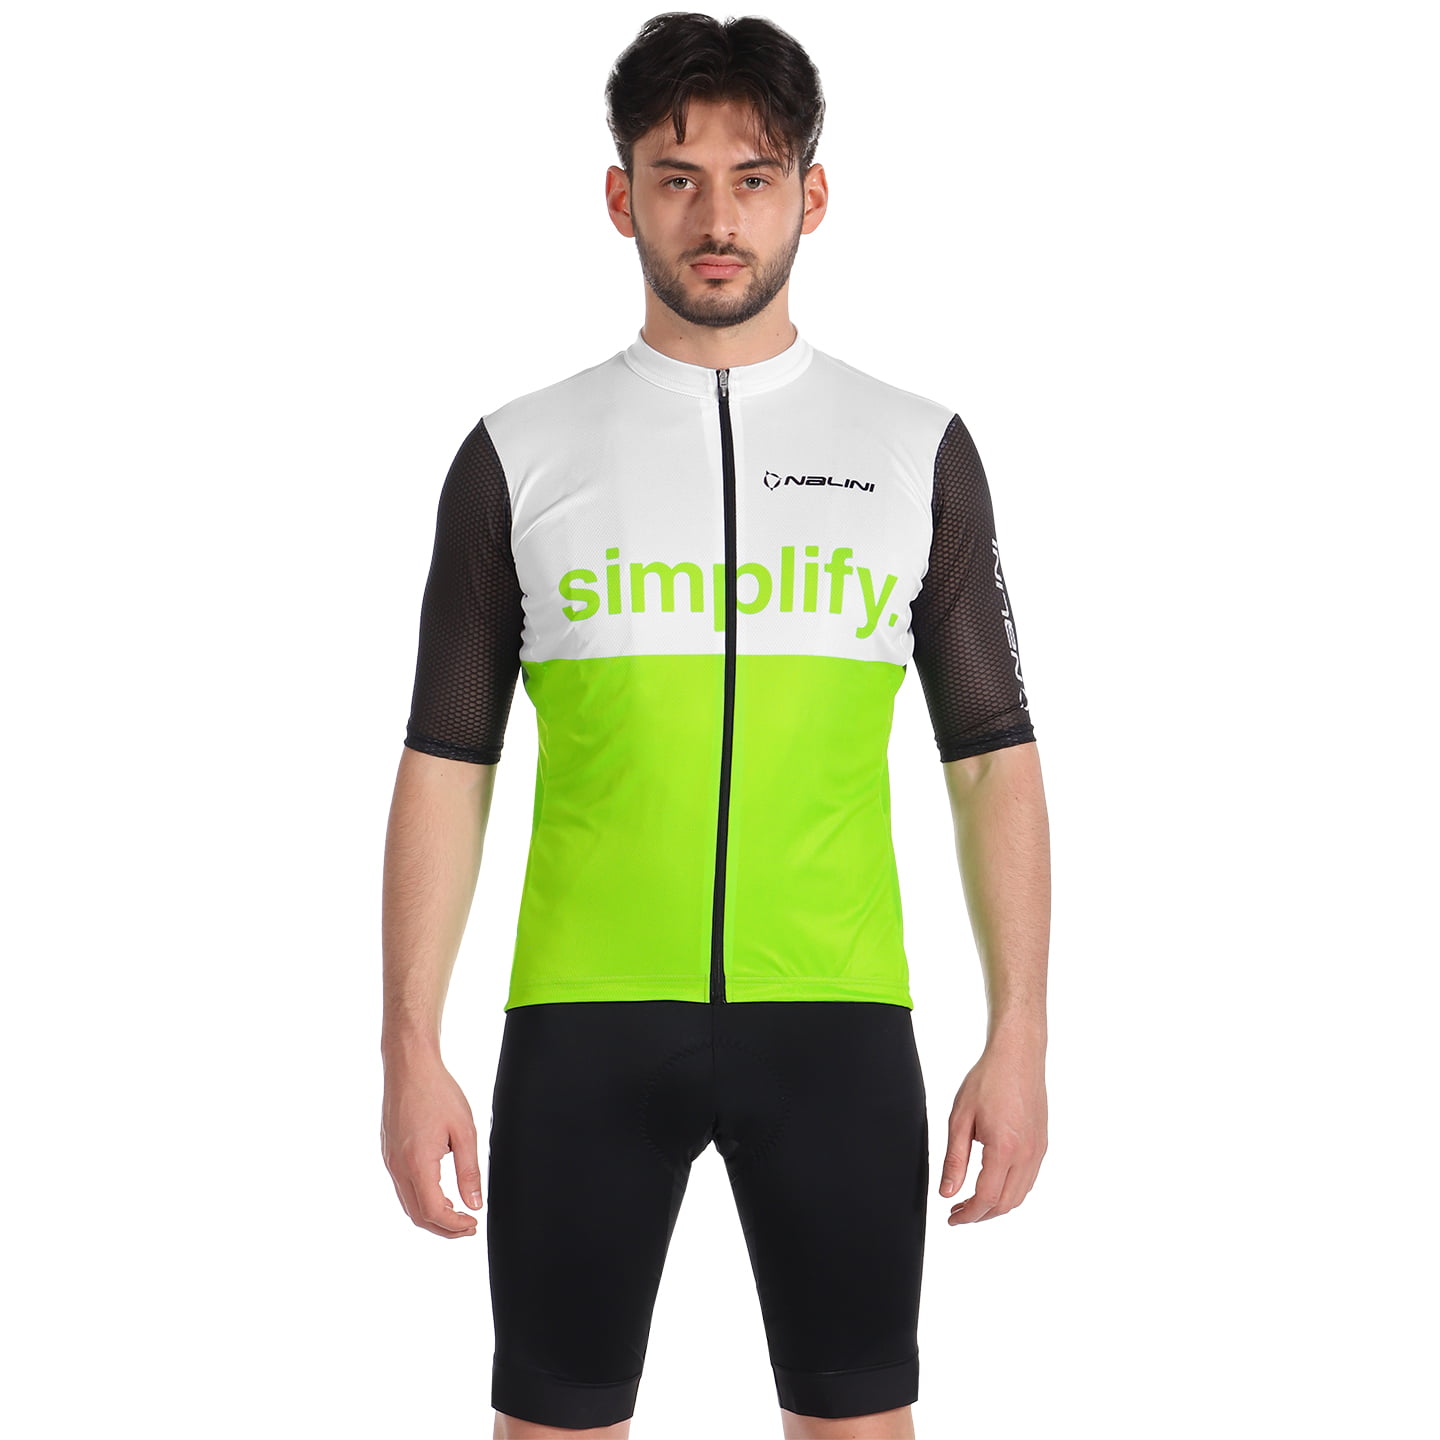 NALINI New Classica Set (cycling jersey + cycling shorts) Set (2 pieces), for men